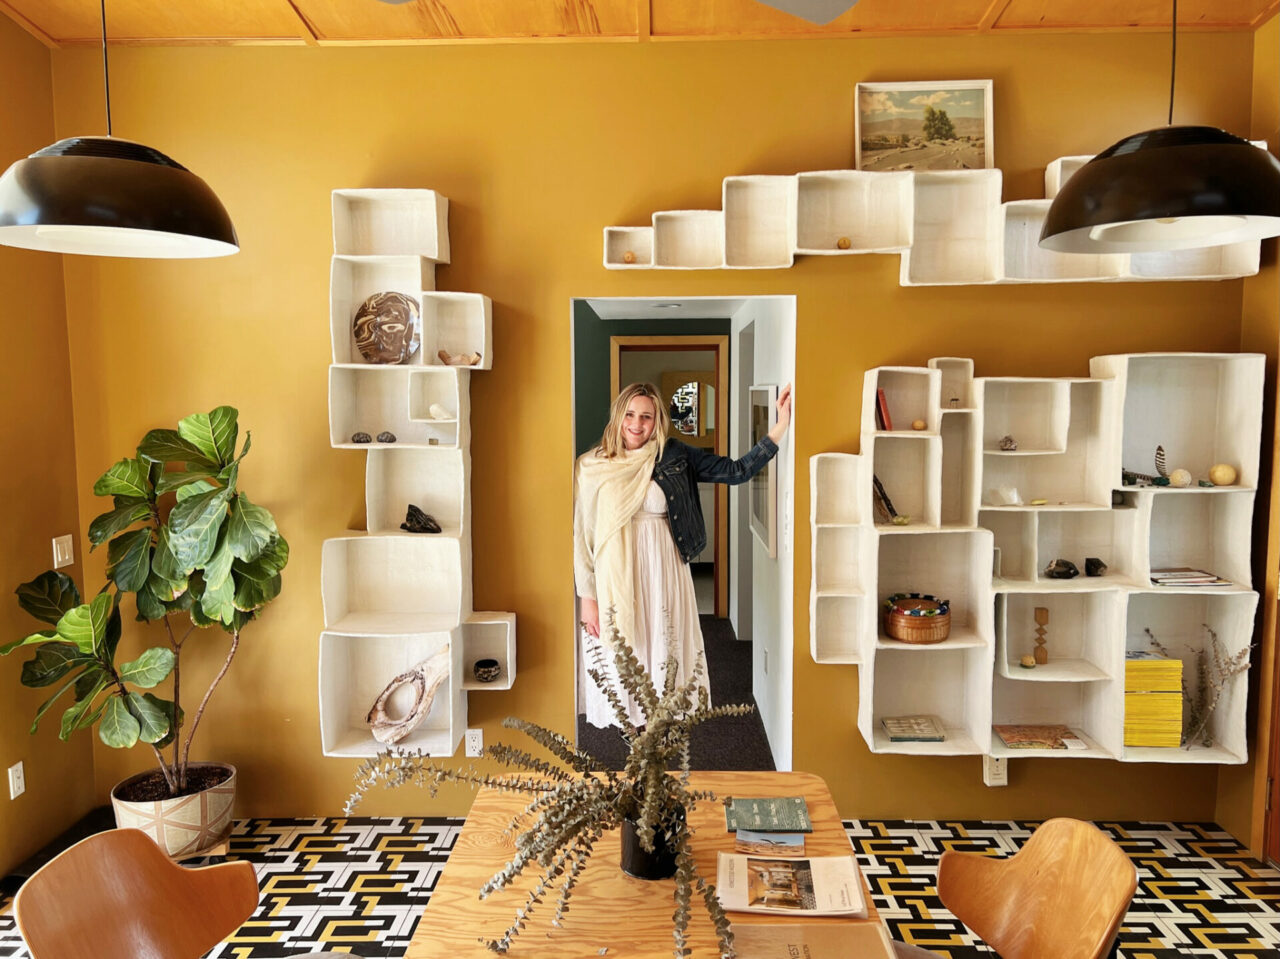 Dany leaning in doorway in Andrea Zittel home in Joshua Tree - yellow with boxes as storage and plant.